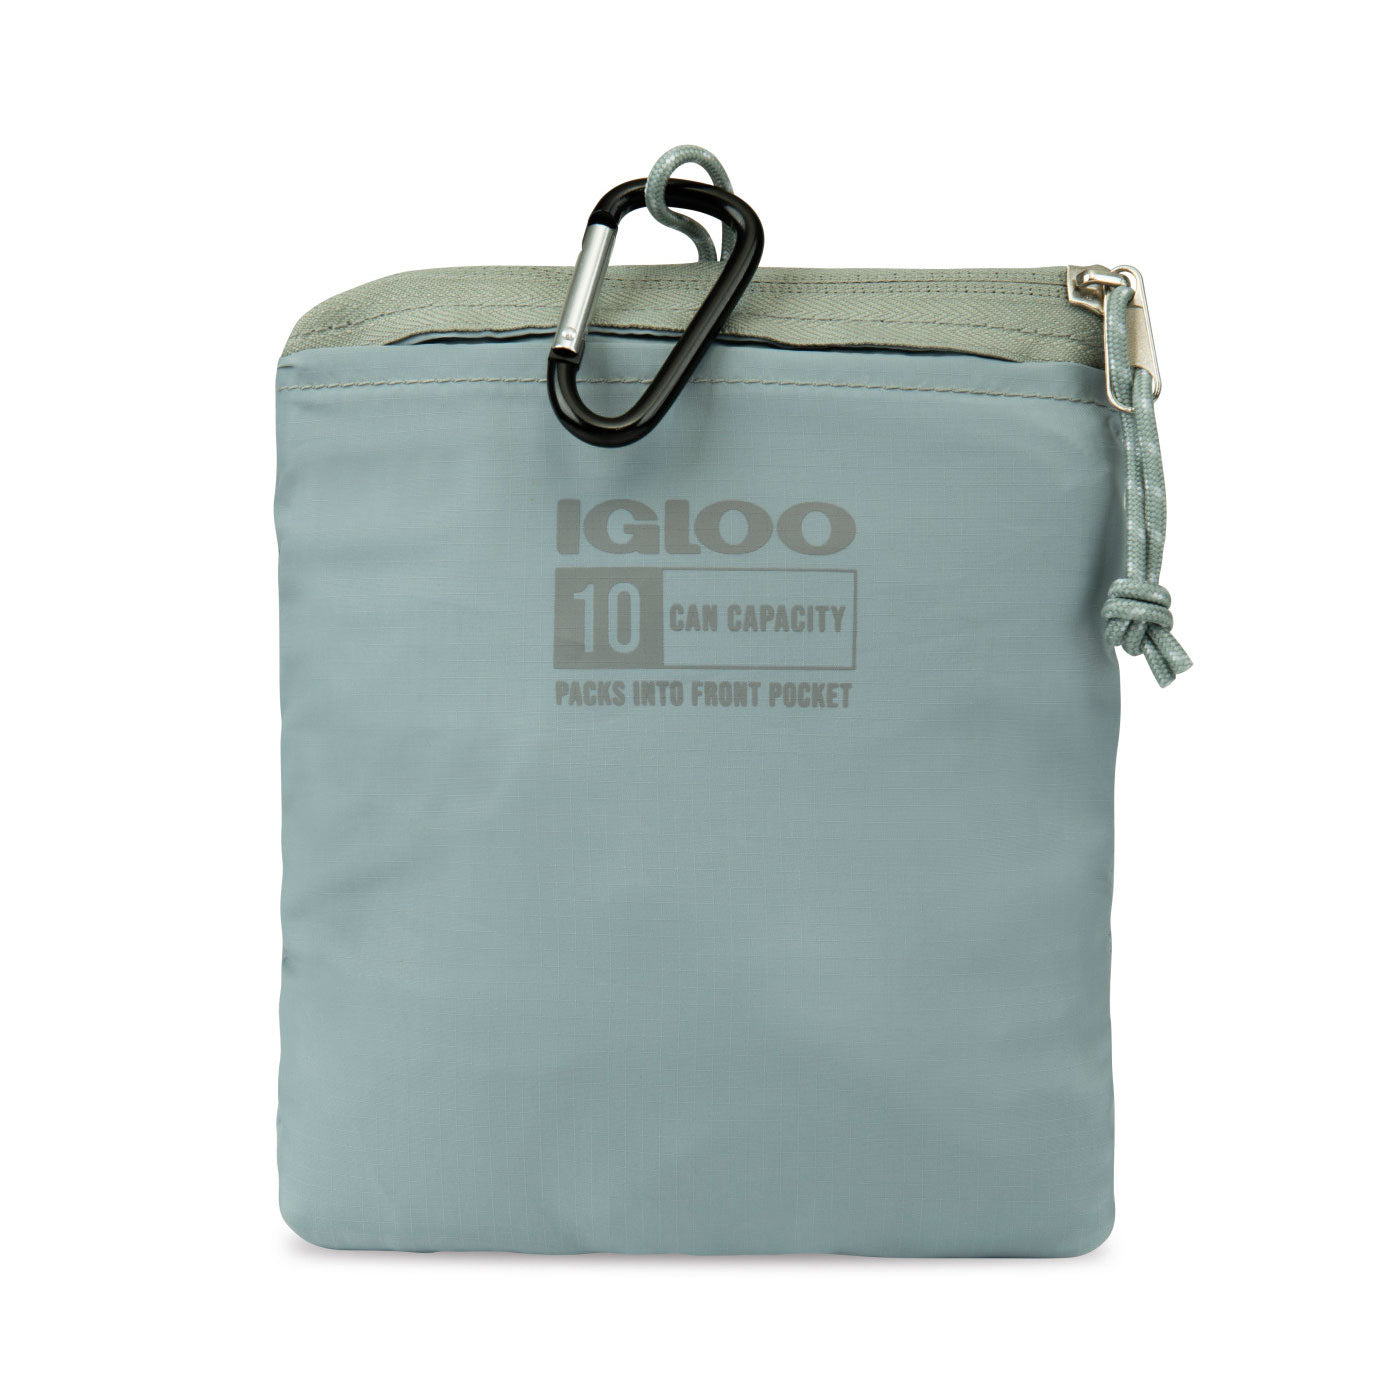 Igloo Packable Puffer 10 Can Branded Cooler Bags, Aqua Gray